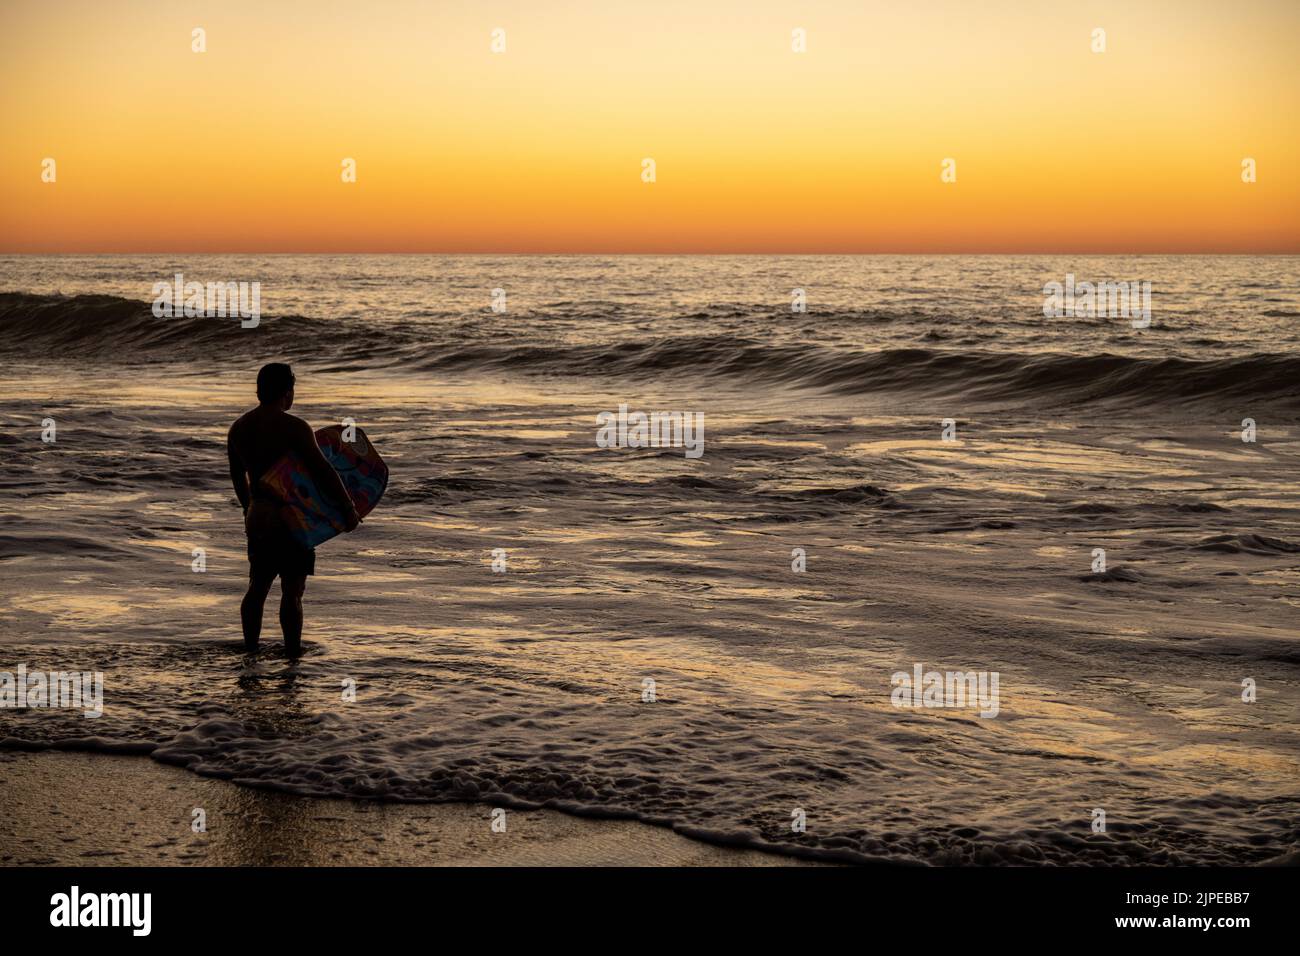 A surfer looking at a sunset on a beach in Sayulita, Mexico Stock Photo